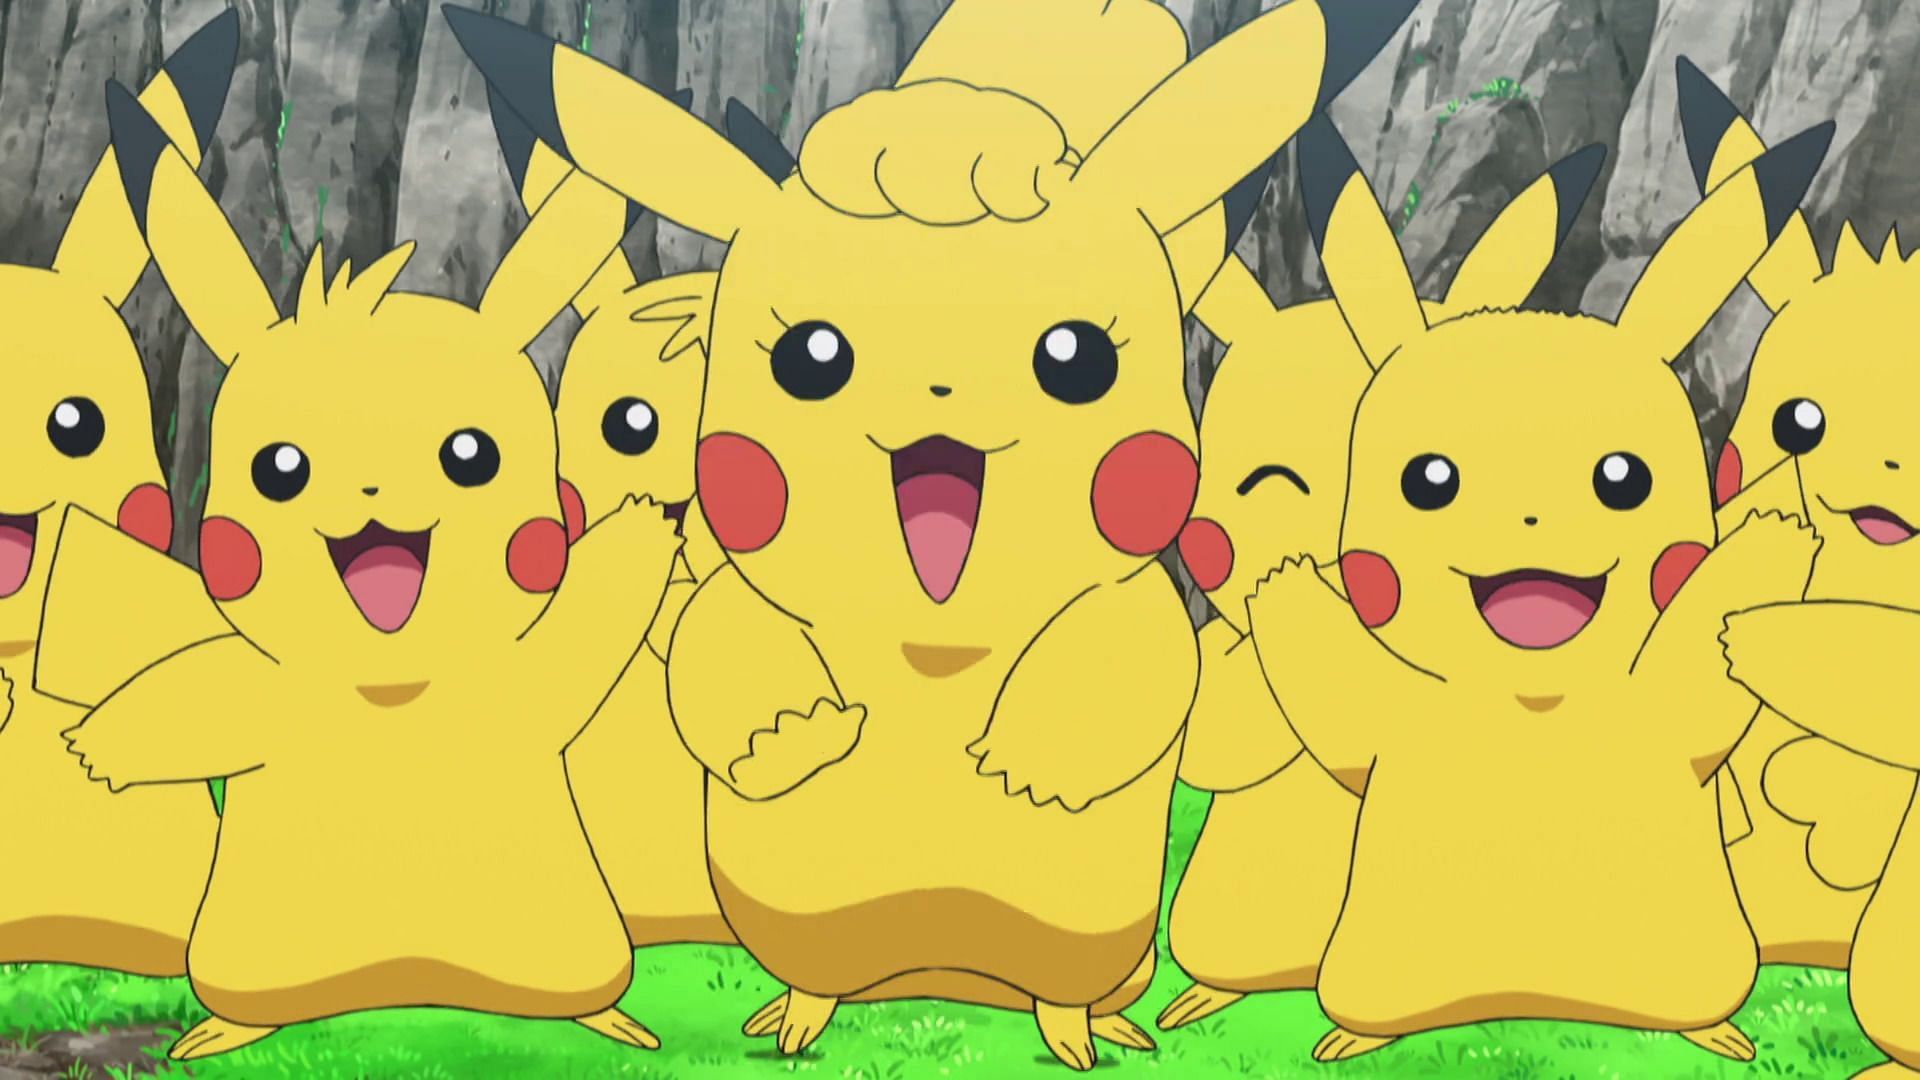 Pikachu is the face of the franchise (Image credits: OLM Incorporated, Pokemon: Sun and Moon)